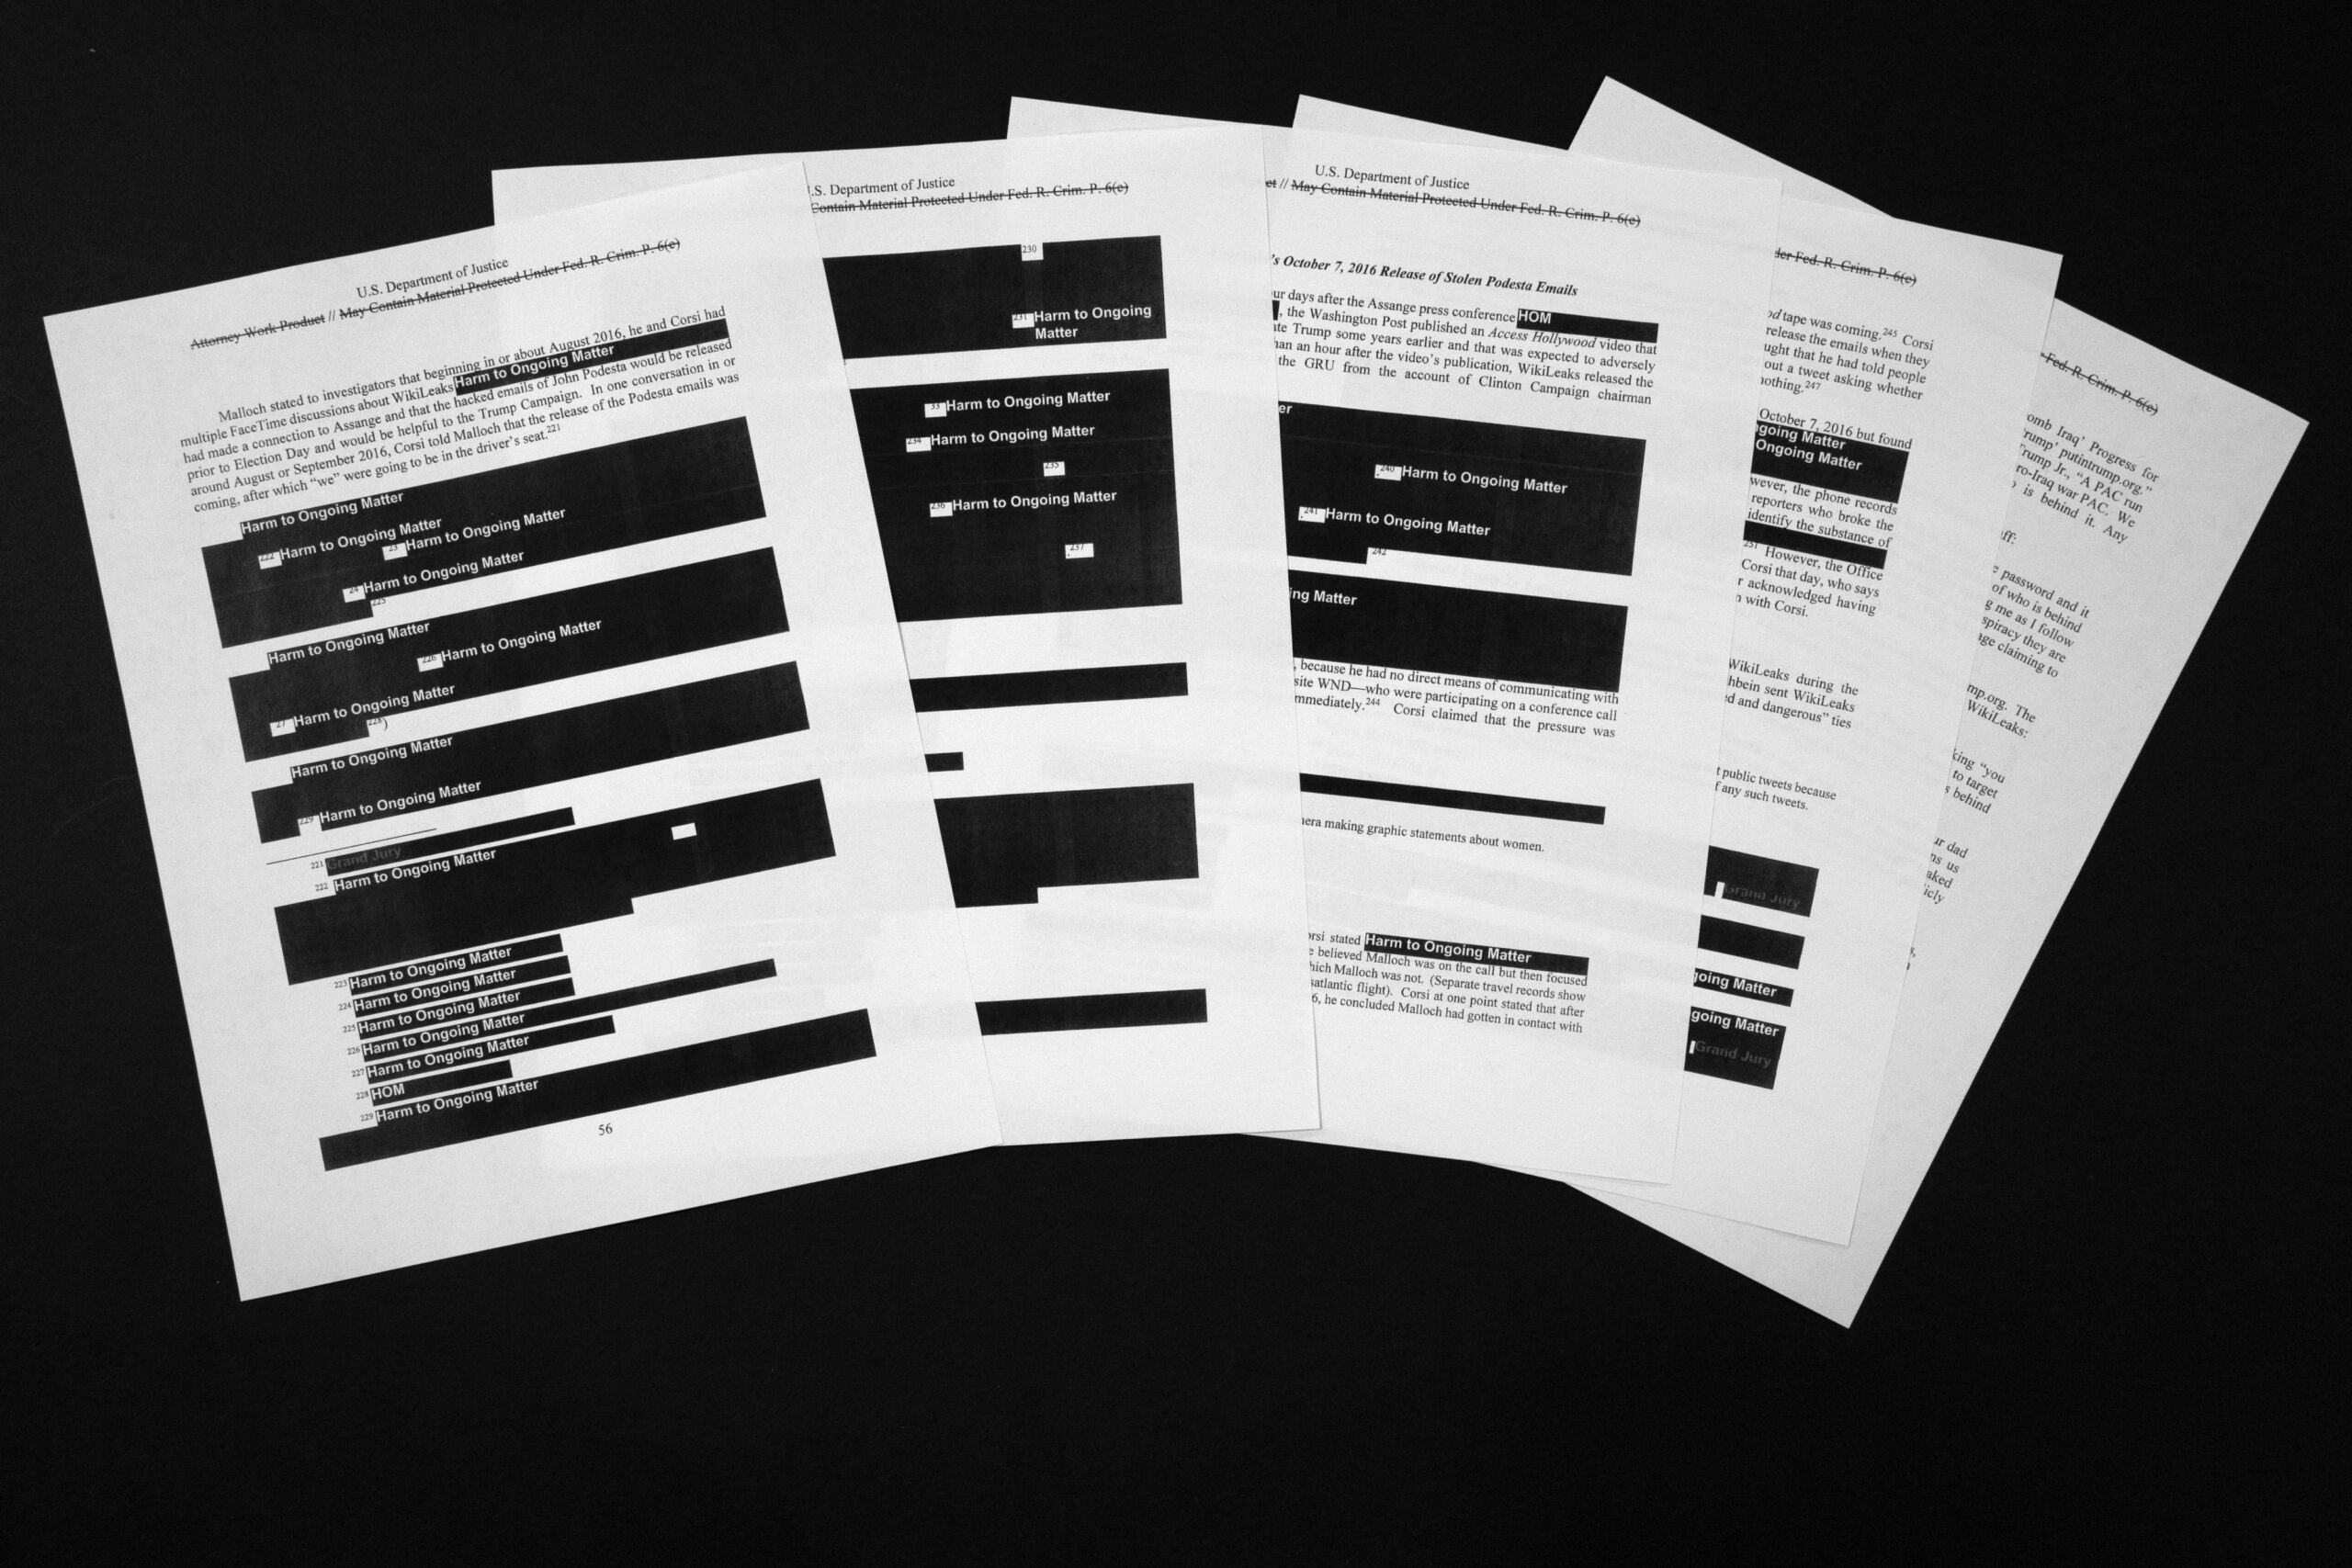 redacted pages of the Mueller report